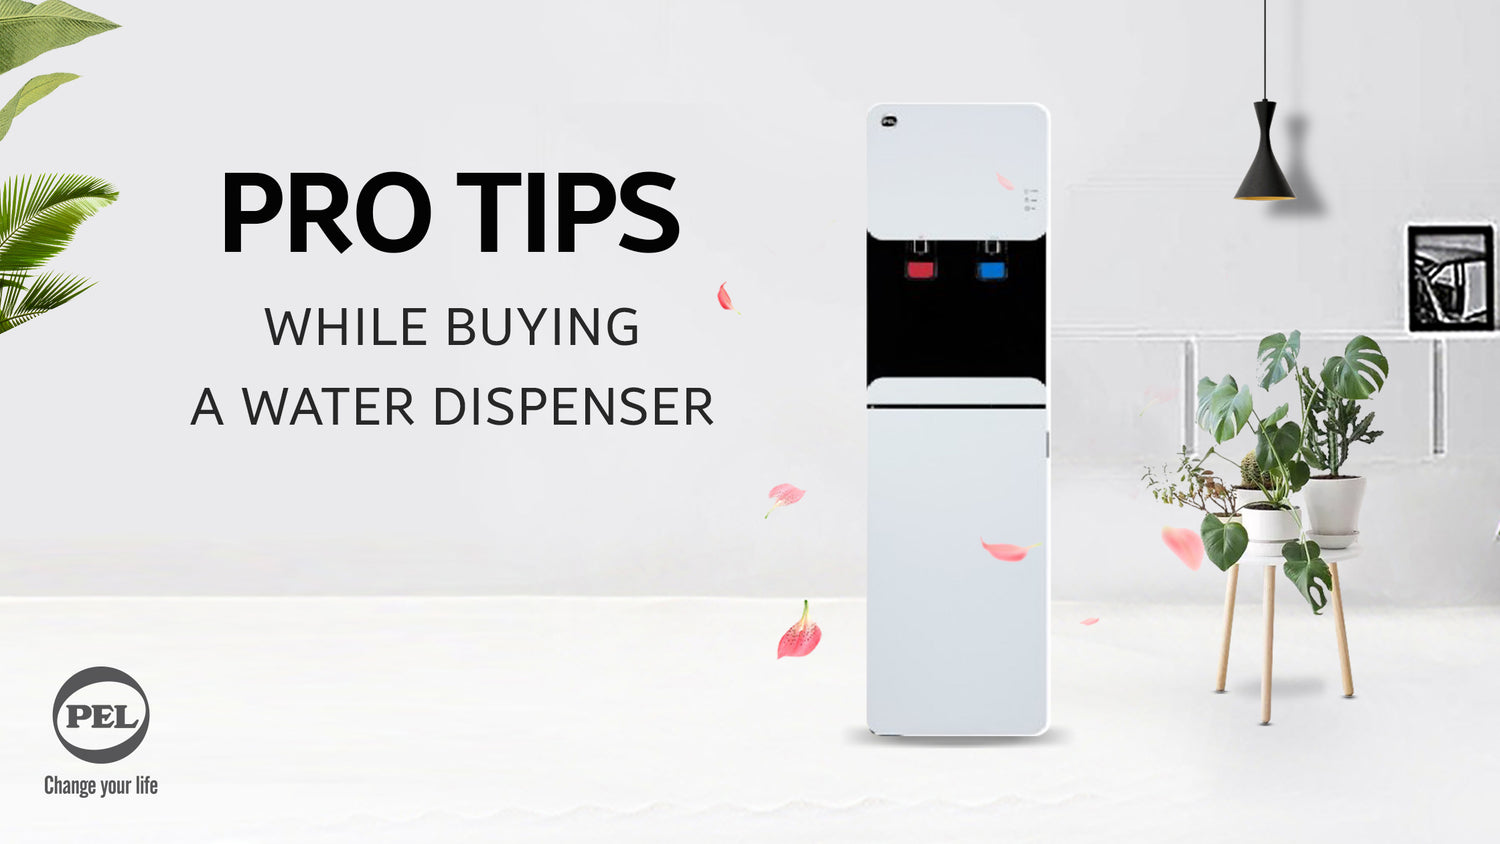 7 Pro Tips to Keep in Mind While Buying a Water Dispenser